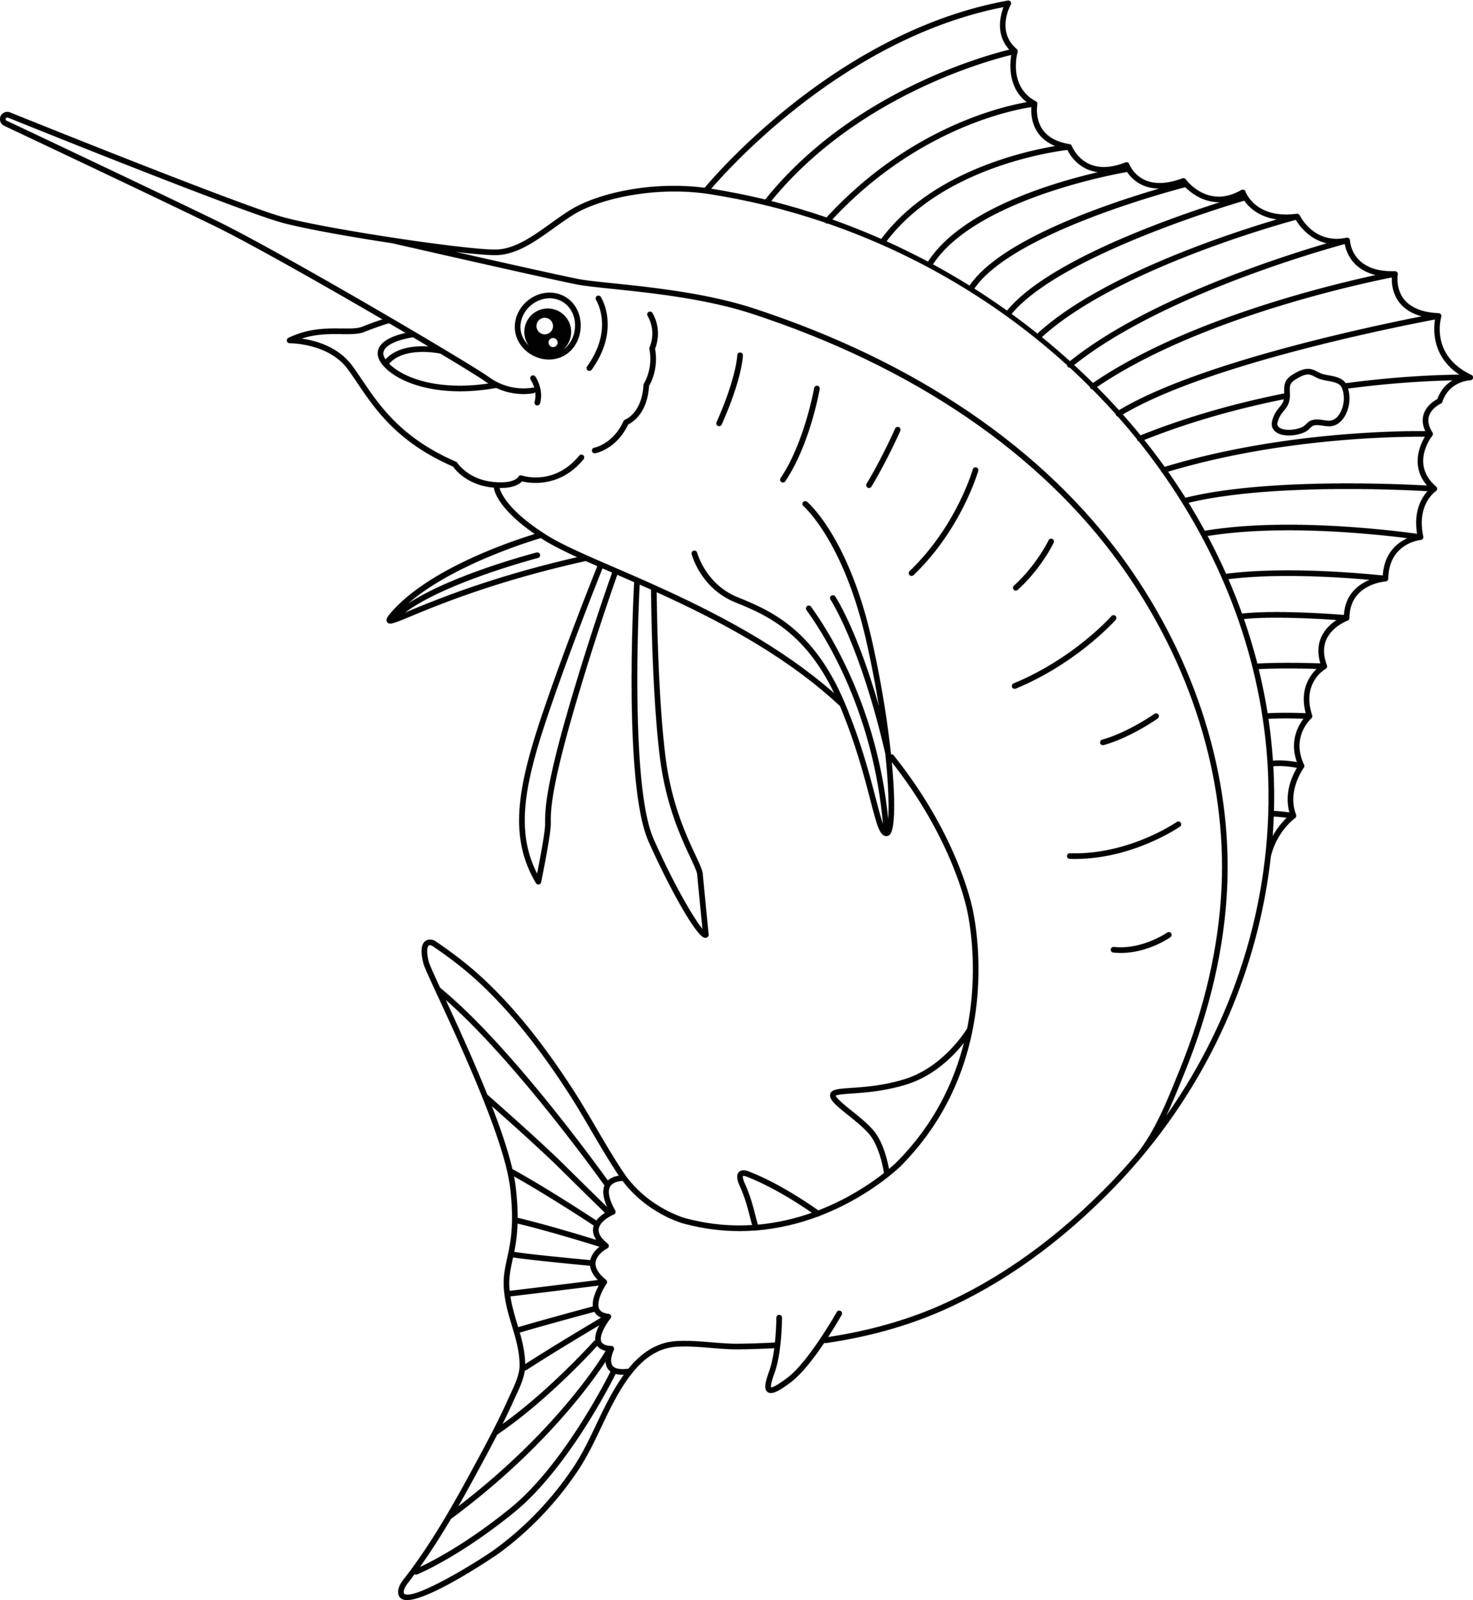 A cute and funny coloring page of a sailfish. Provides hours of coloring fun for children. To color, this page is very easy. Suitable for little kids and toddlers.